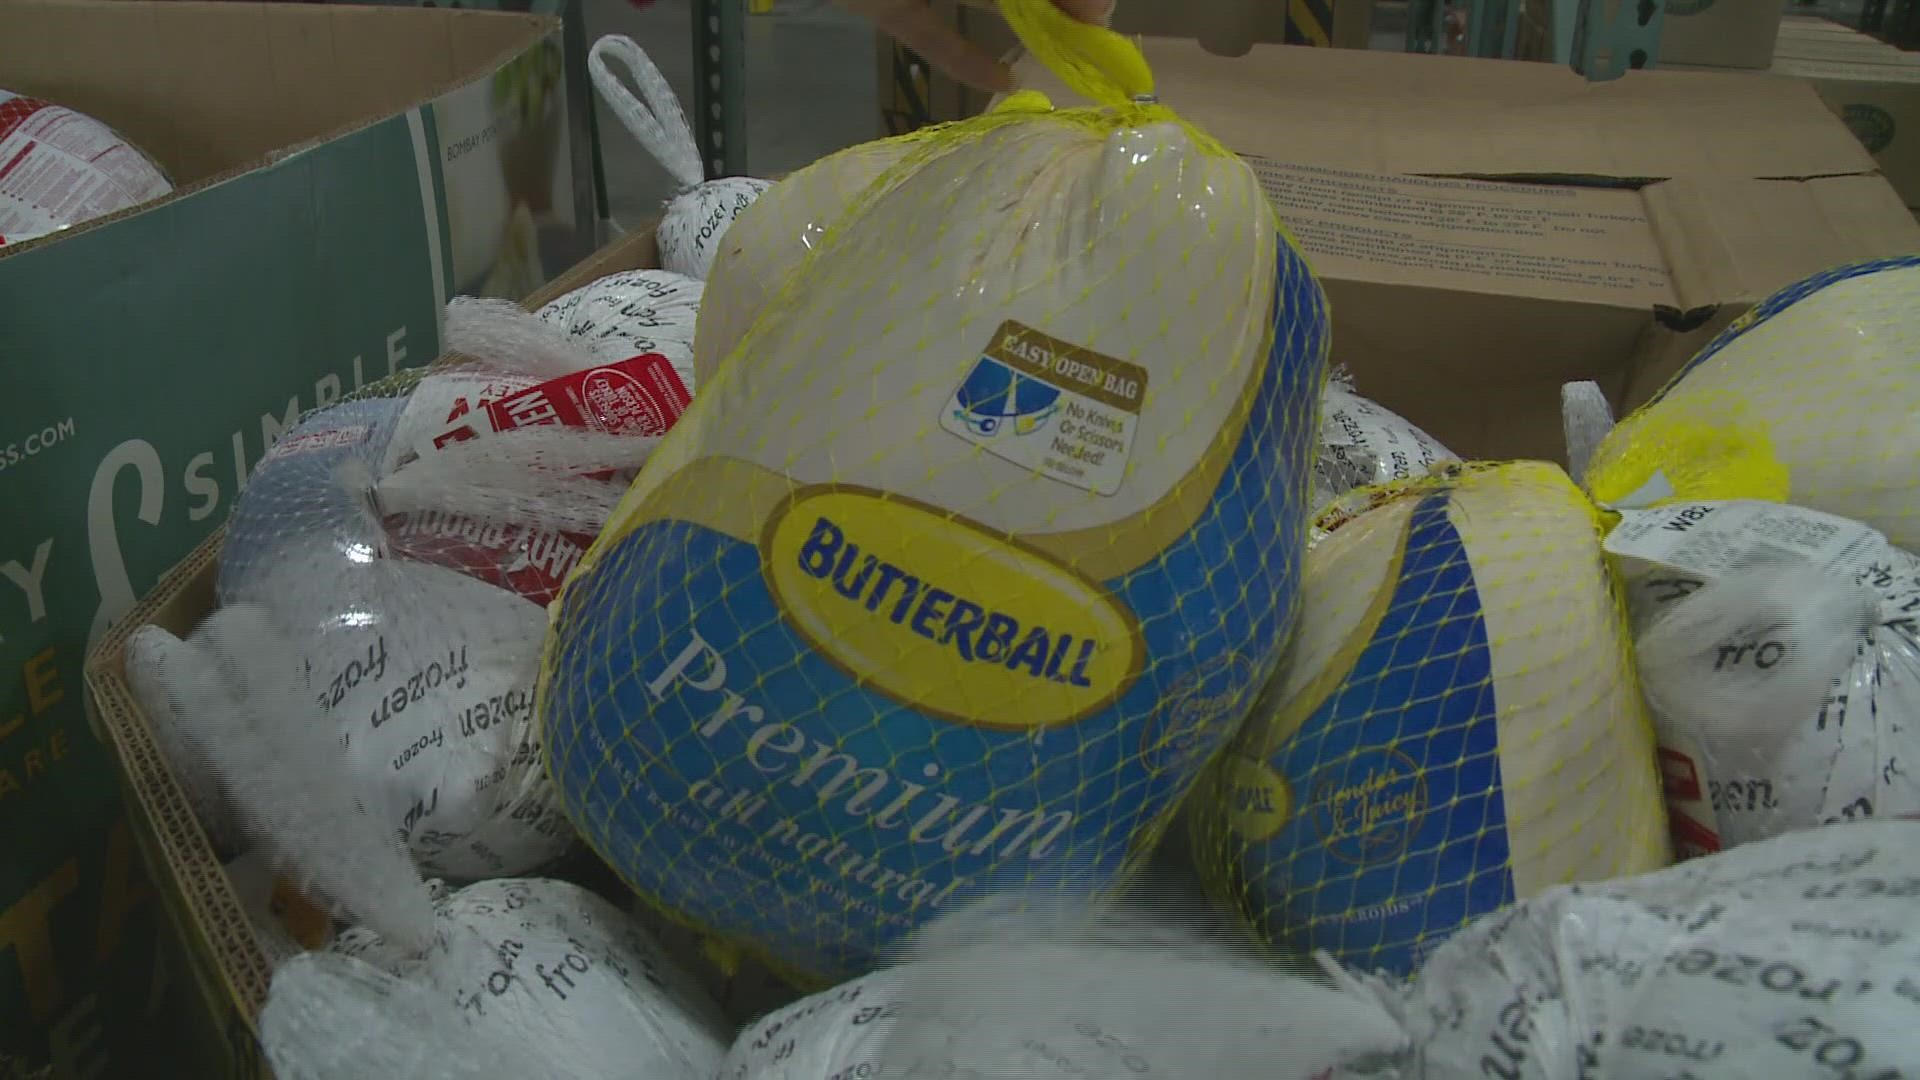 Turkey Tuesday was held at Connecticut Foodshare and sponsored by Bank of America. They asked people to donate a frozen turkey or $40.